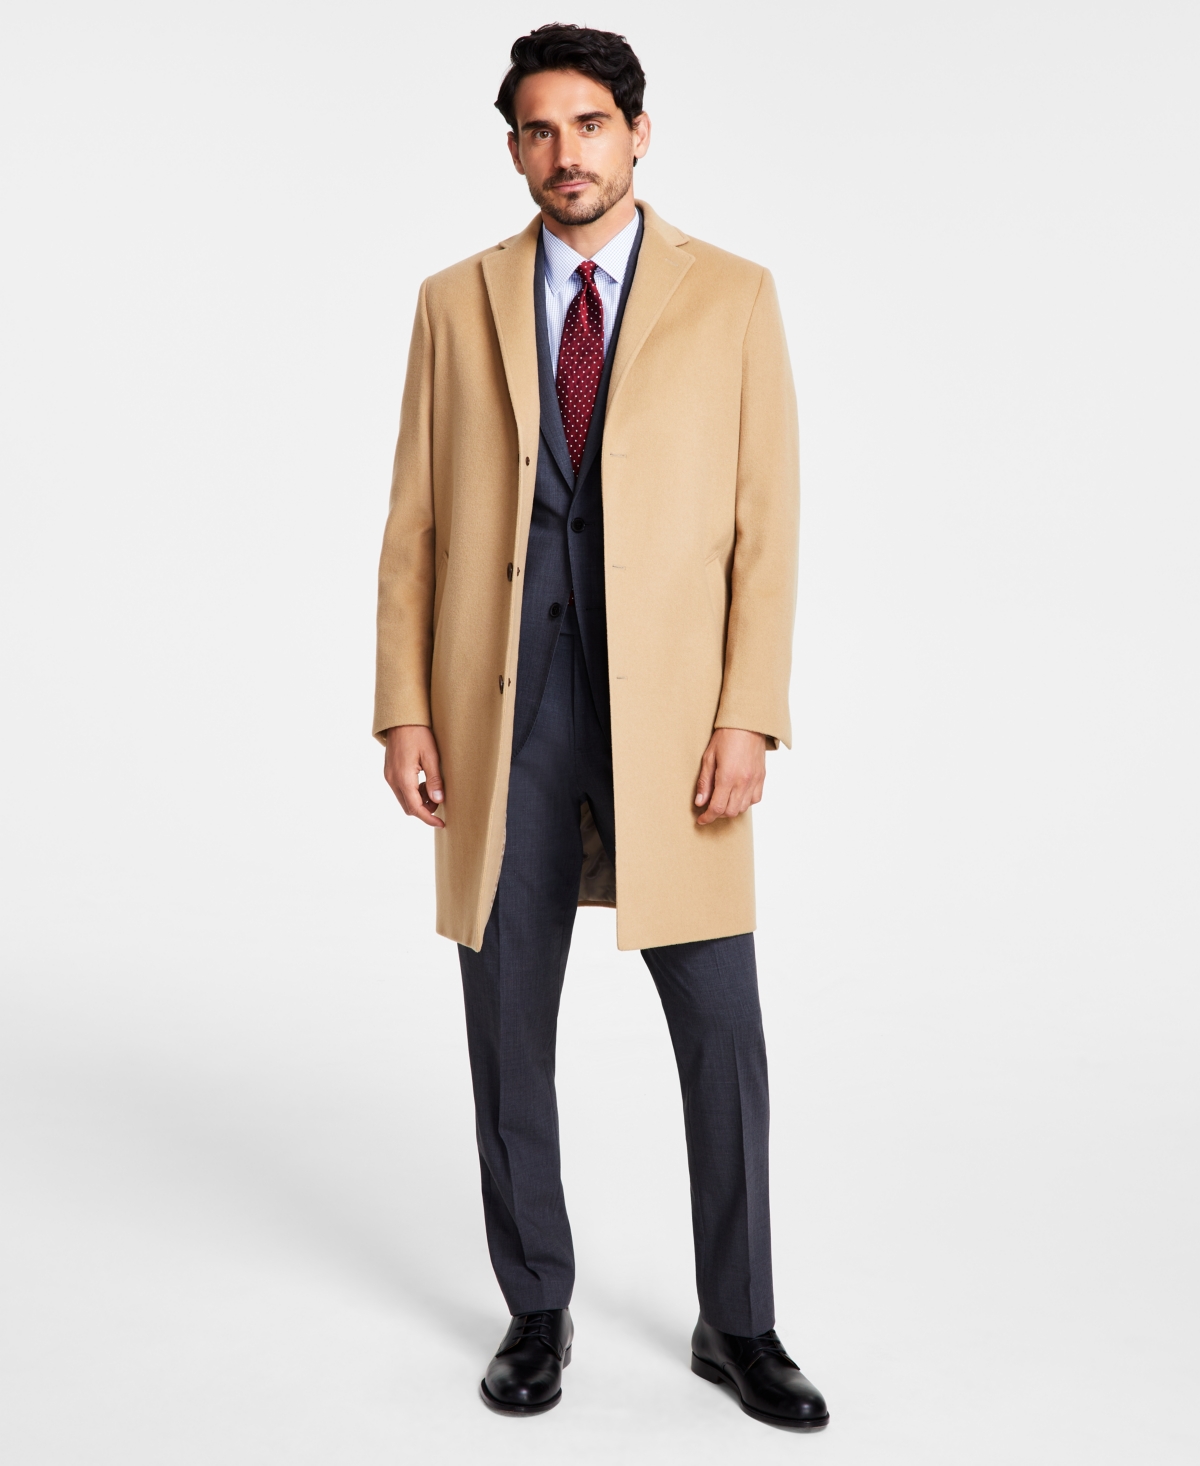 B by Brooks Brothers Men's Wool Overcoats - Camel